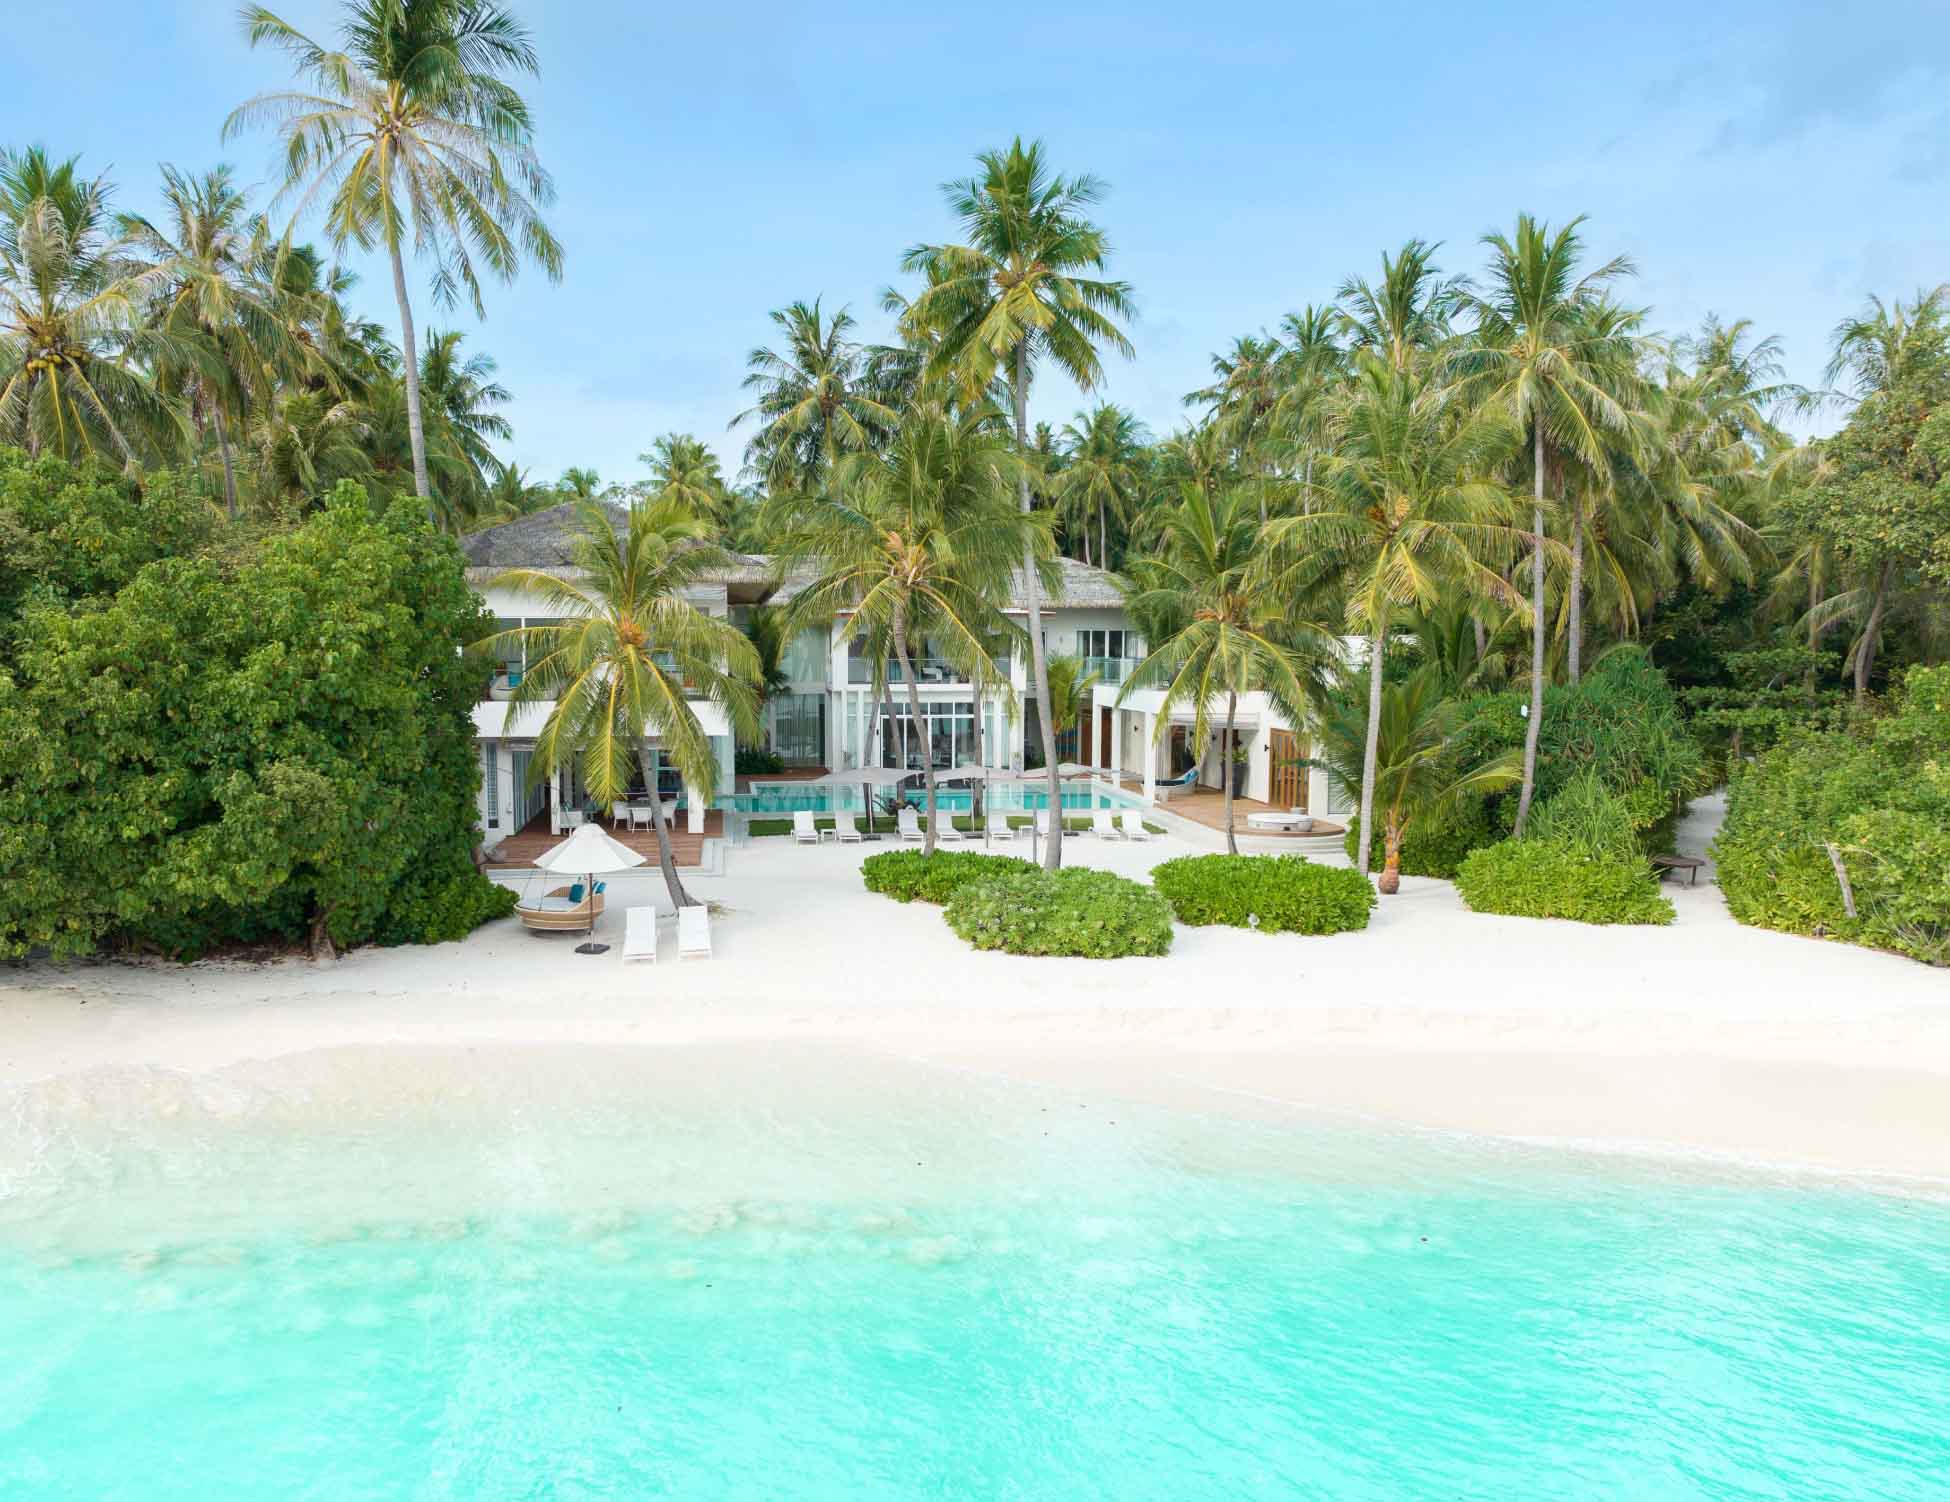 An exterior beachside view of the Amilla Estate - Our premier Maldives Family Accommodation